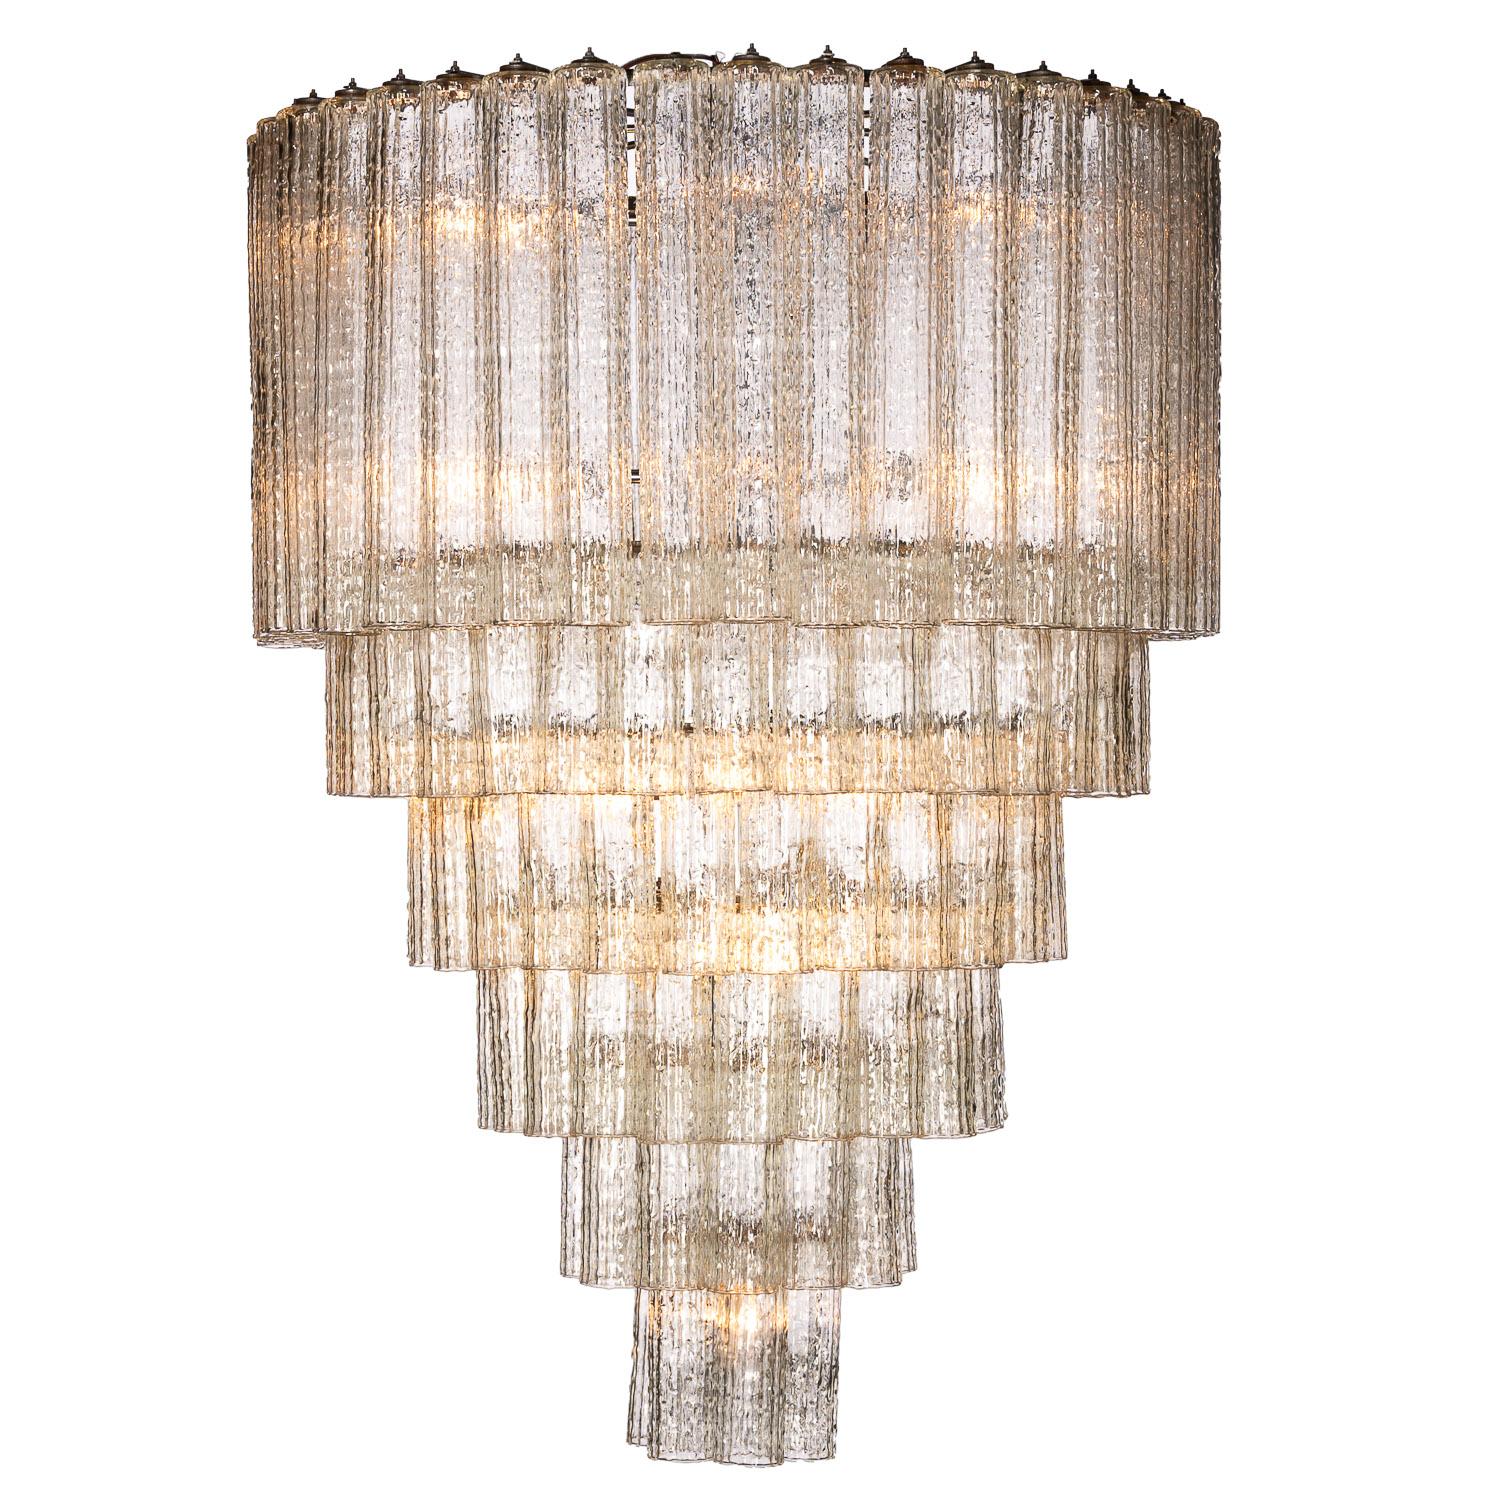 These high quality custom Venini chandeliers, from the 